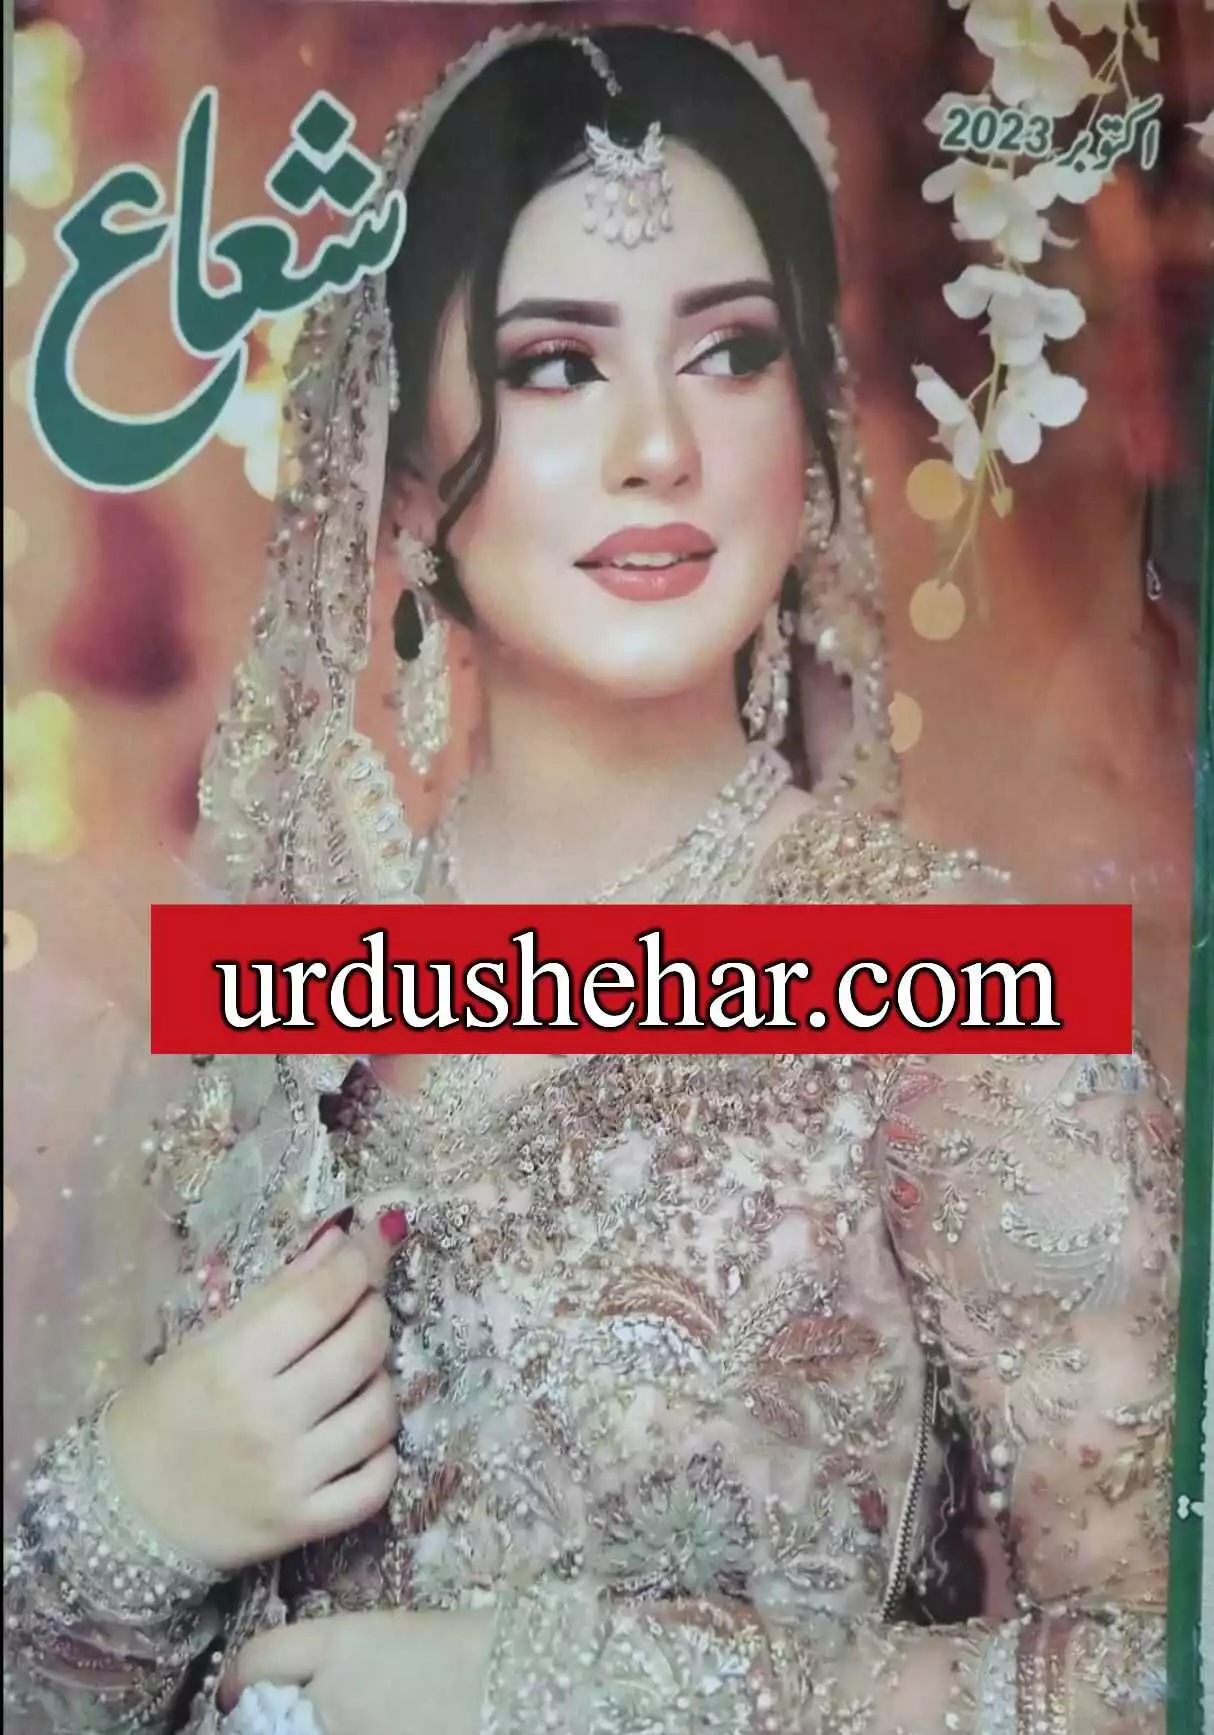 Shuaa Digest October 2023 Pdf Free Download